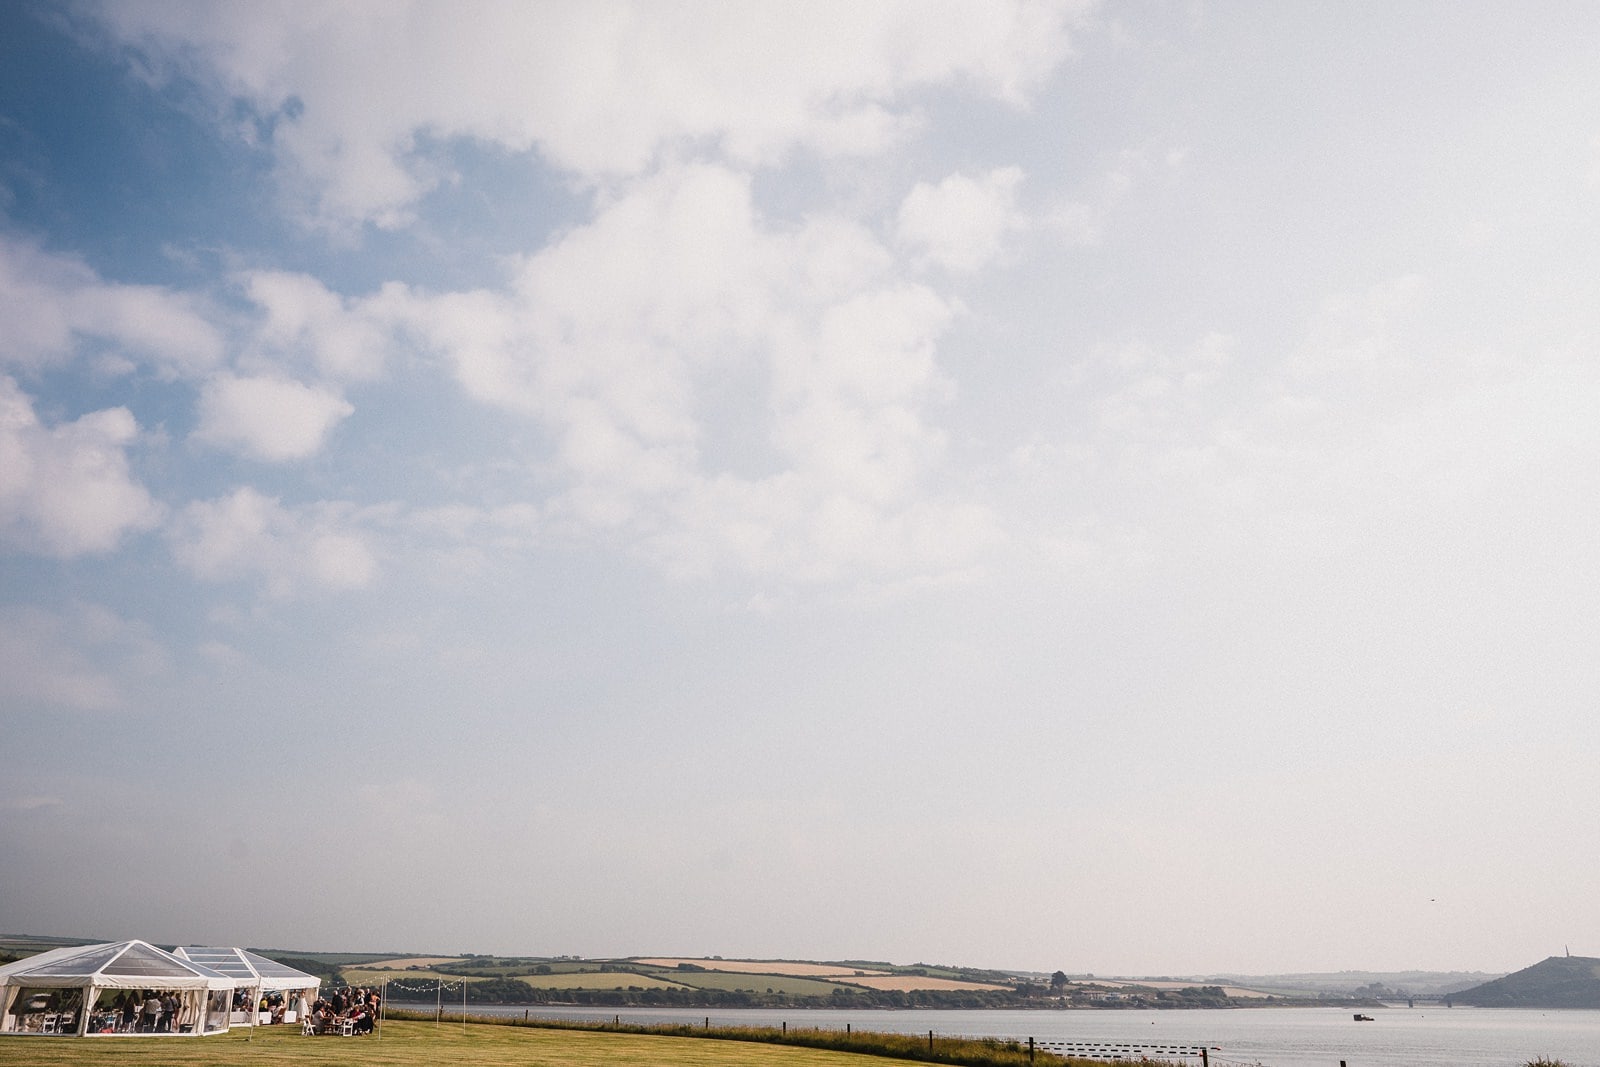 A view of the wedding marquee at Porthilly Farm